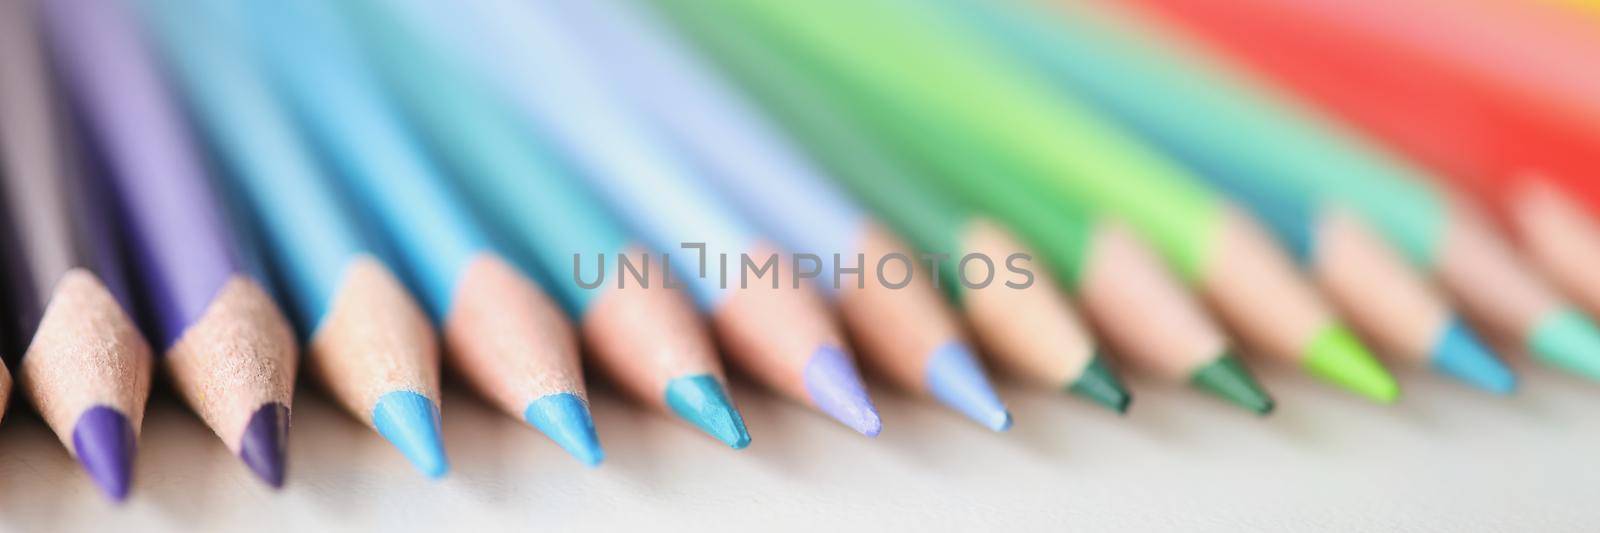 Many sharp multicolored pencils lying over colors of rainbow closeup background by kuprevich